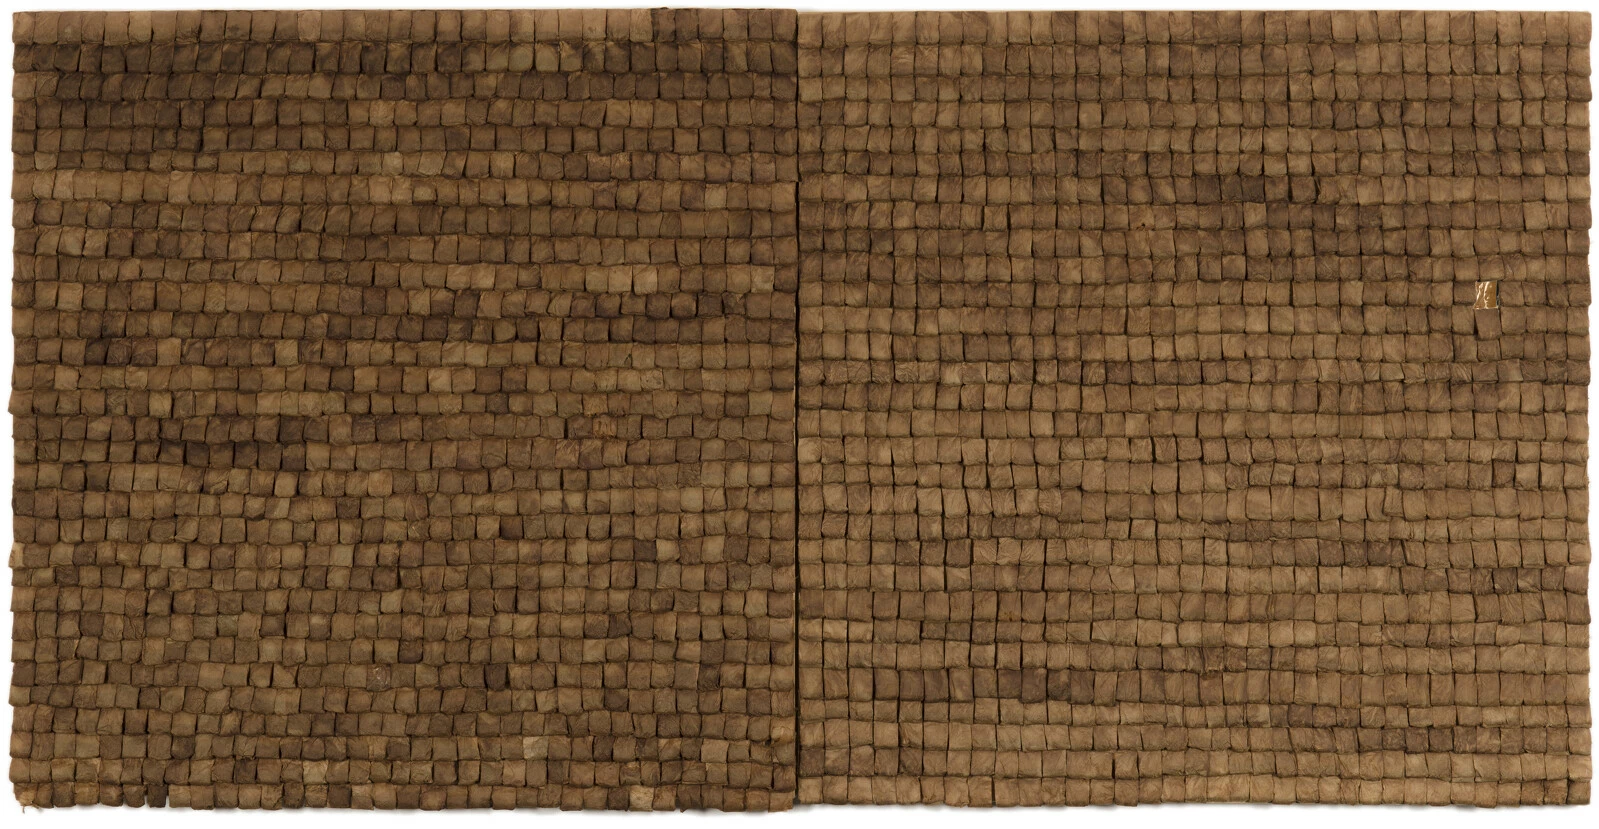 Two panels with rows and rows of used, brown teabags.